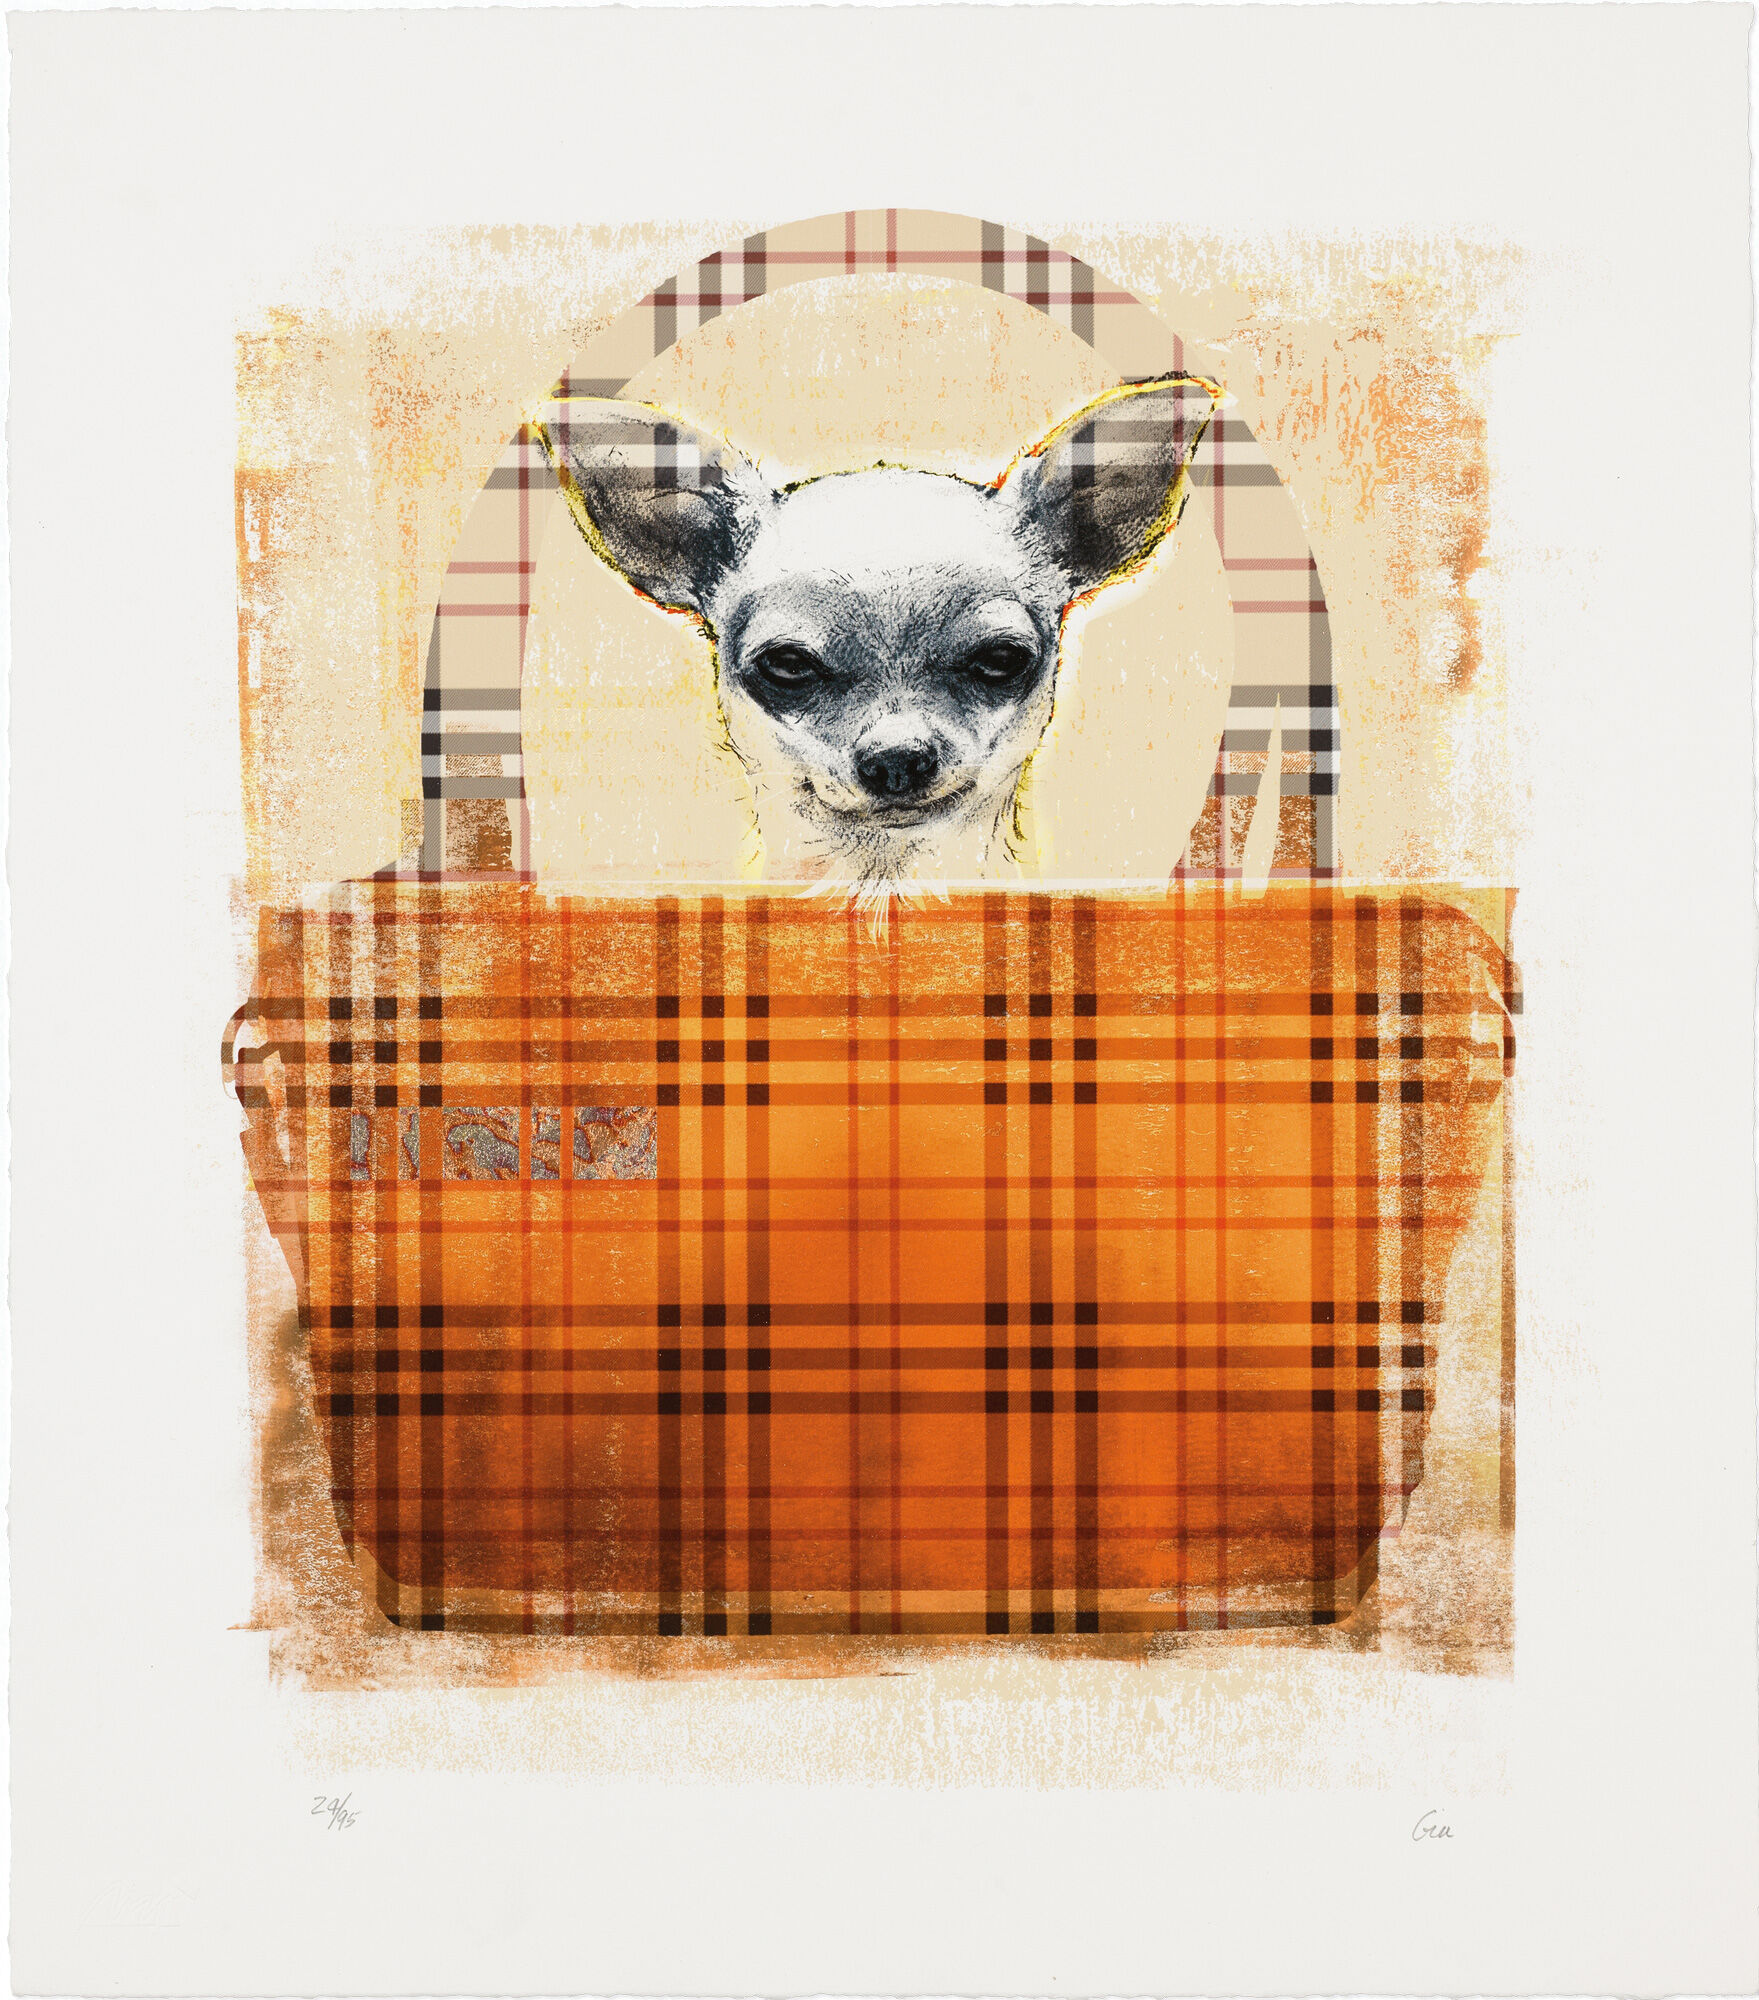 Picture "Burberry Dog" (2014) by Shannan Gia